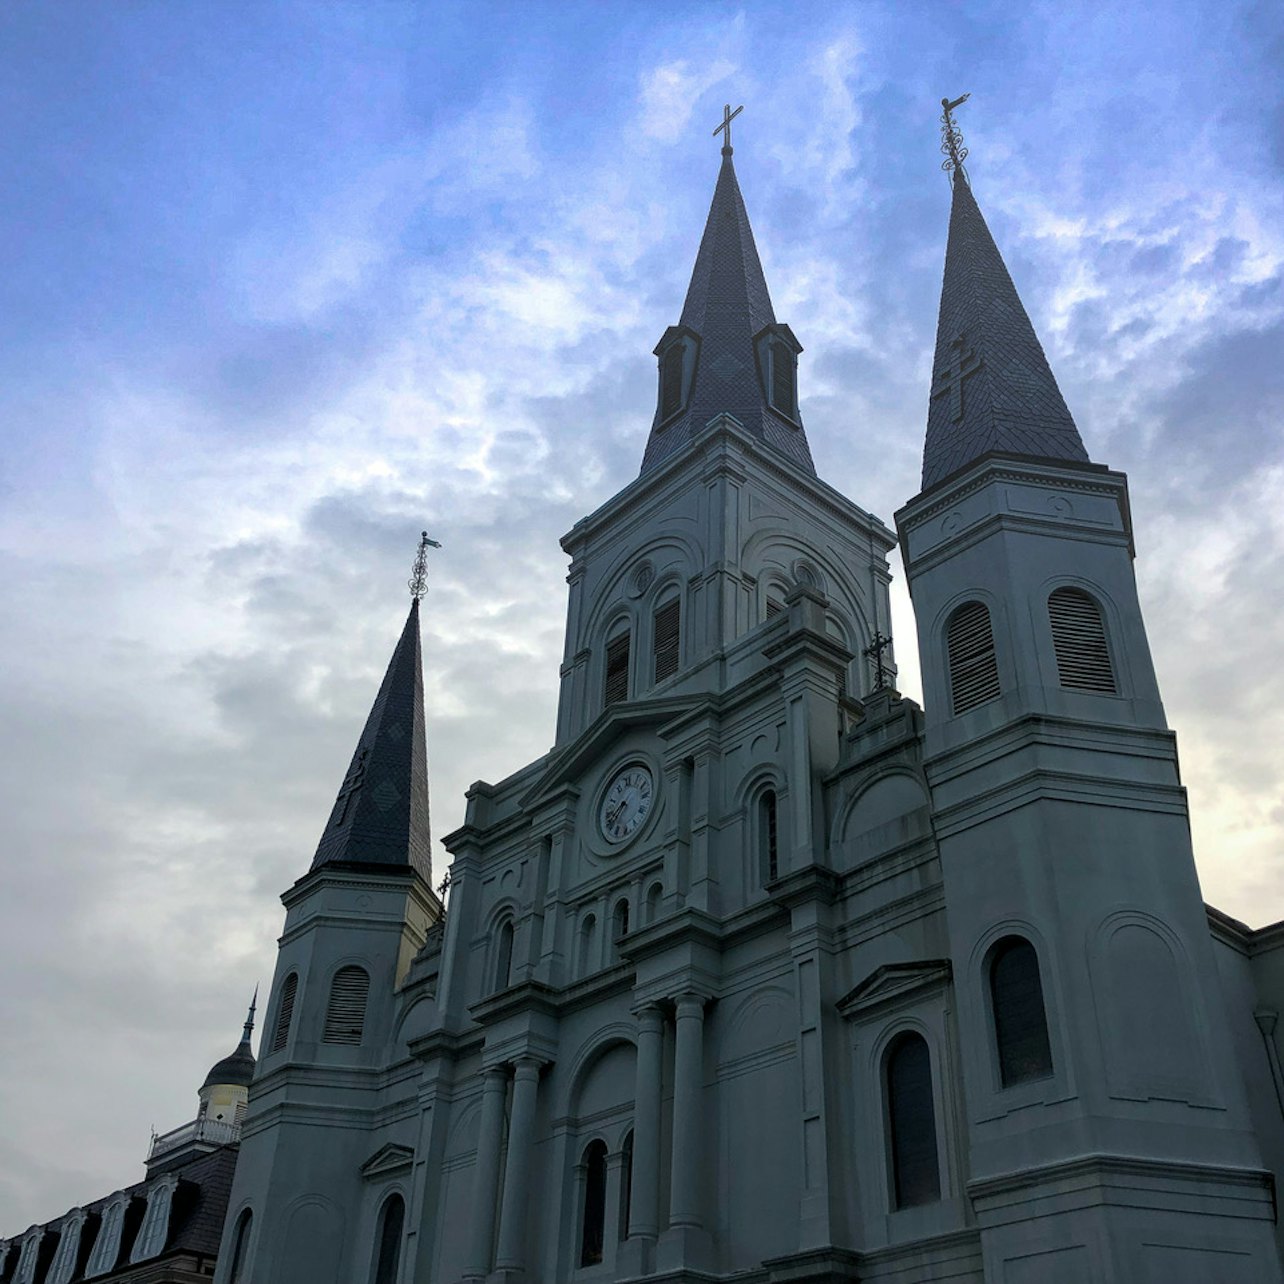 New Orleans Voodoo Tour - Accommodations in New Orleans